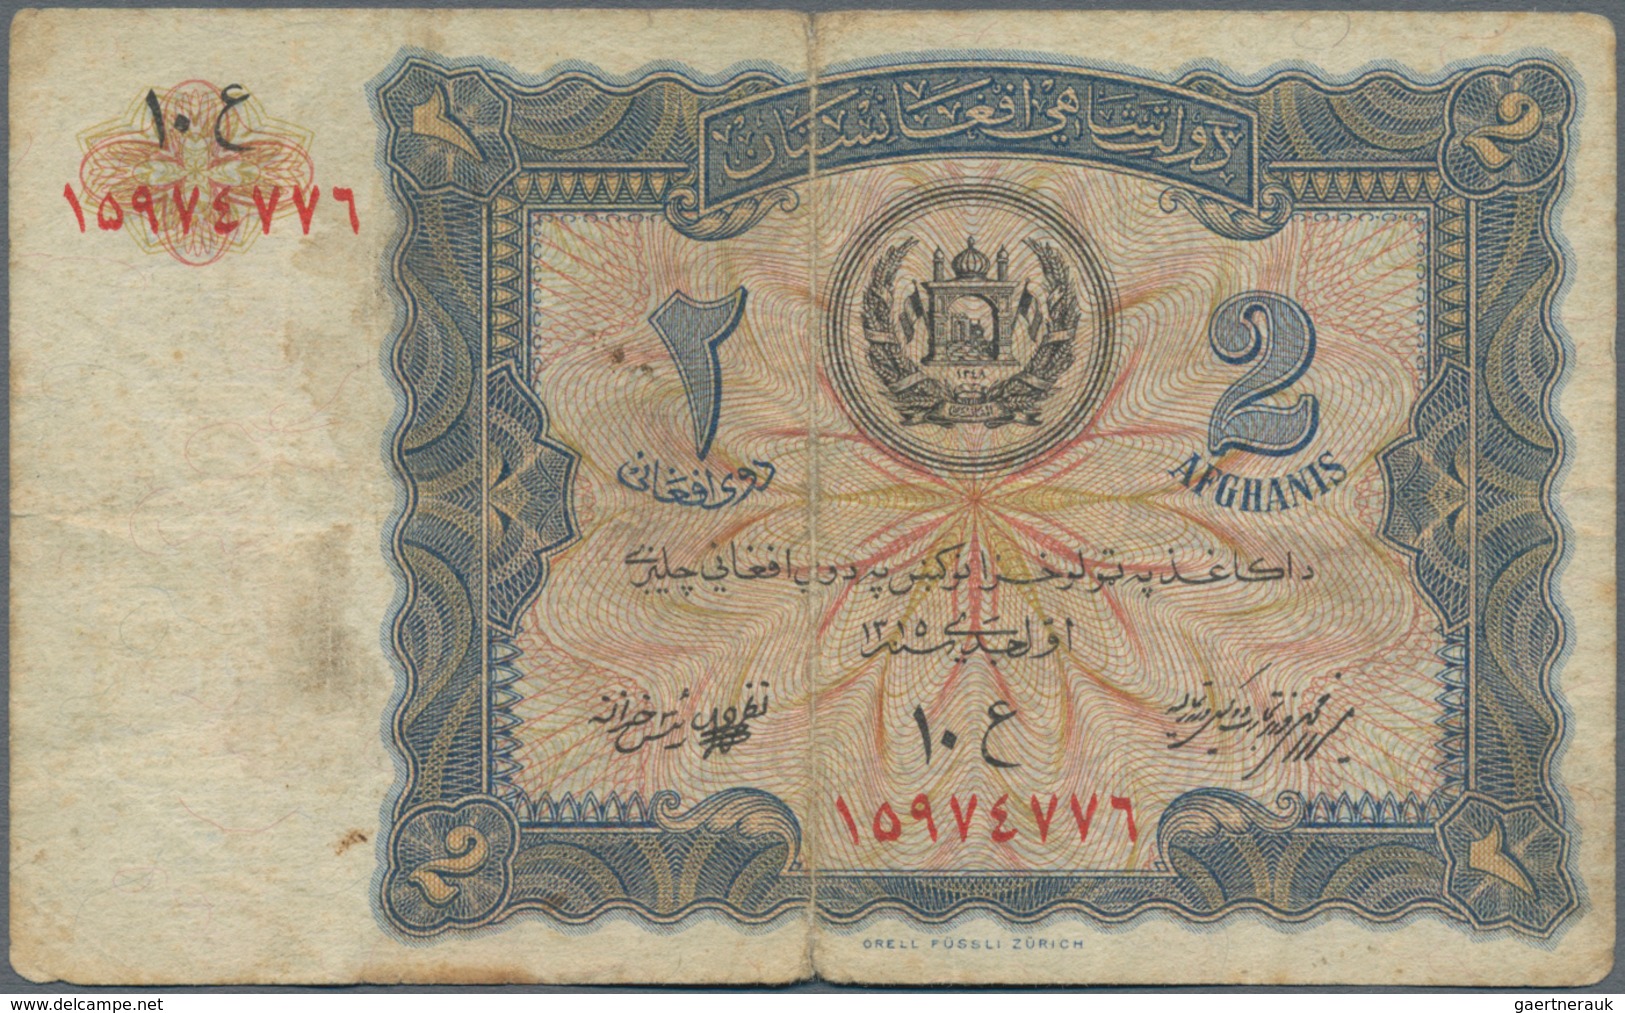 Afghanistan: Small Lot With 3 Banknotes 1 Afghani SH 1298 (1919) P.1 (F), 50 Afghanis SH 1307 (1928) - Afghanistán